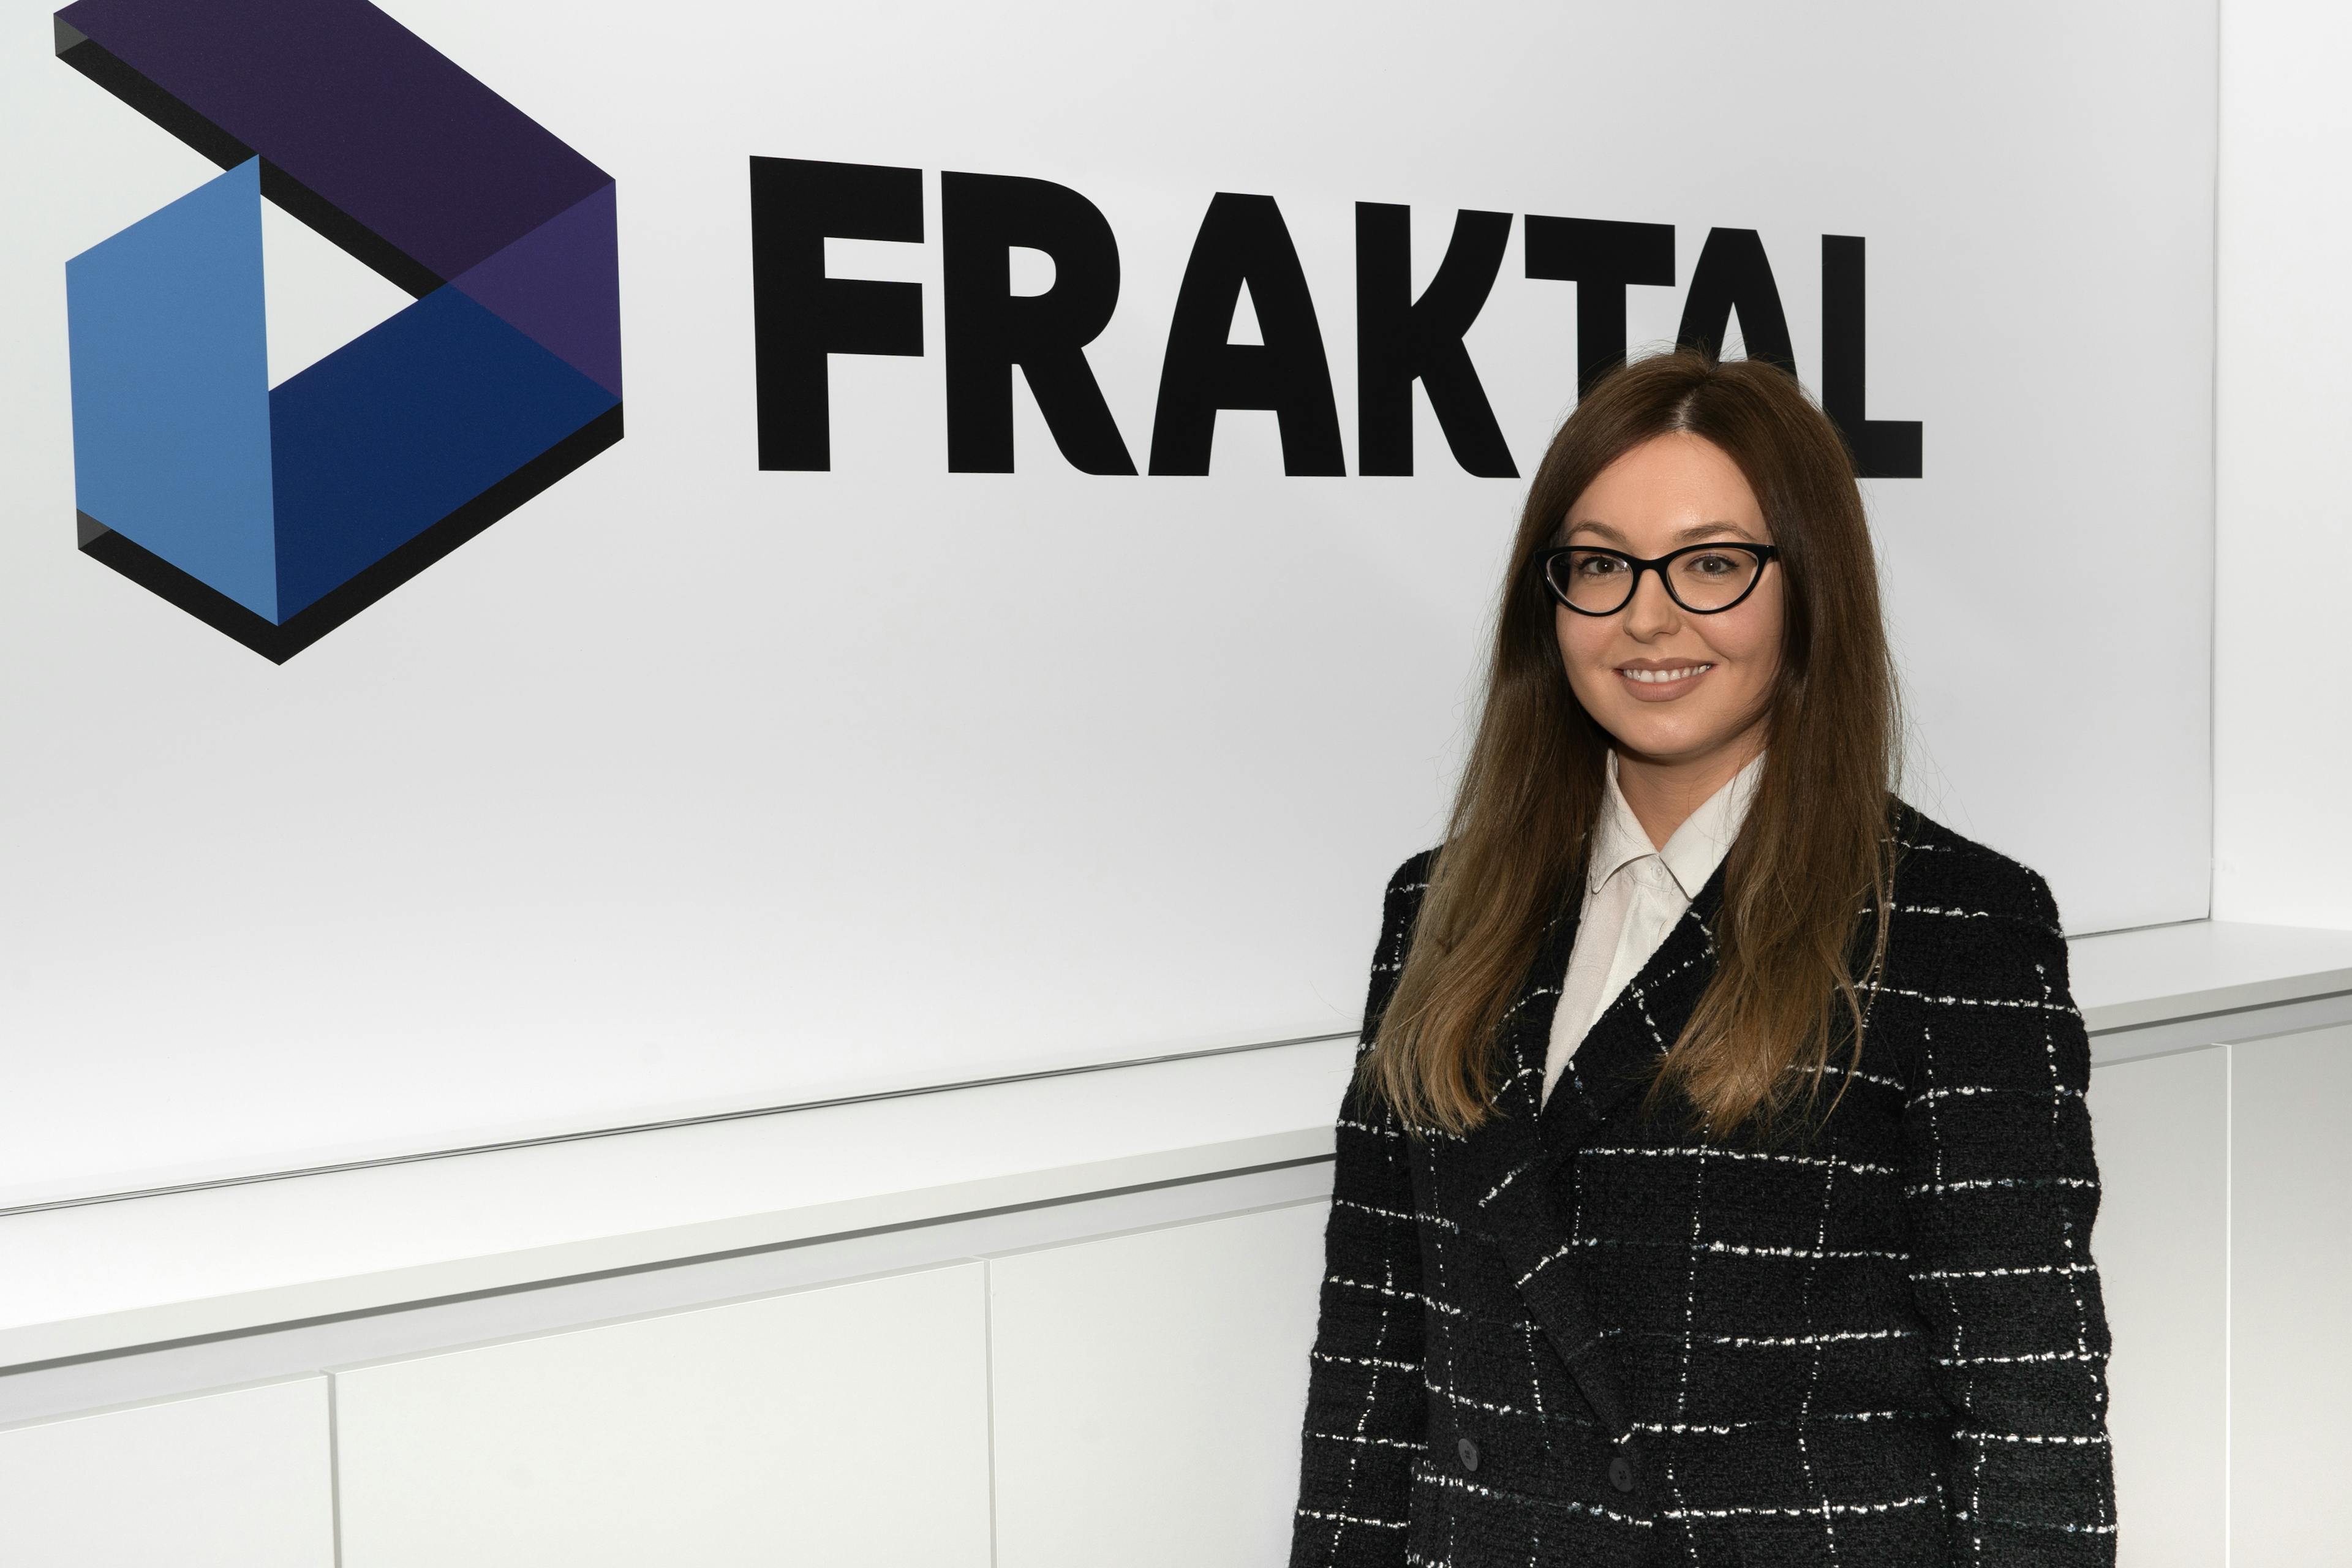 Mia Mikulic from the administration team at Fraktal Development, standing confidently with a friendly expression. She wears stylish glasses, a chic black and white tweed jacket over a crisp white shirt, projecting professionalism and approachability. The bold 'FRAKTAL' logo in the background affirms the corporate identity.